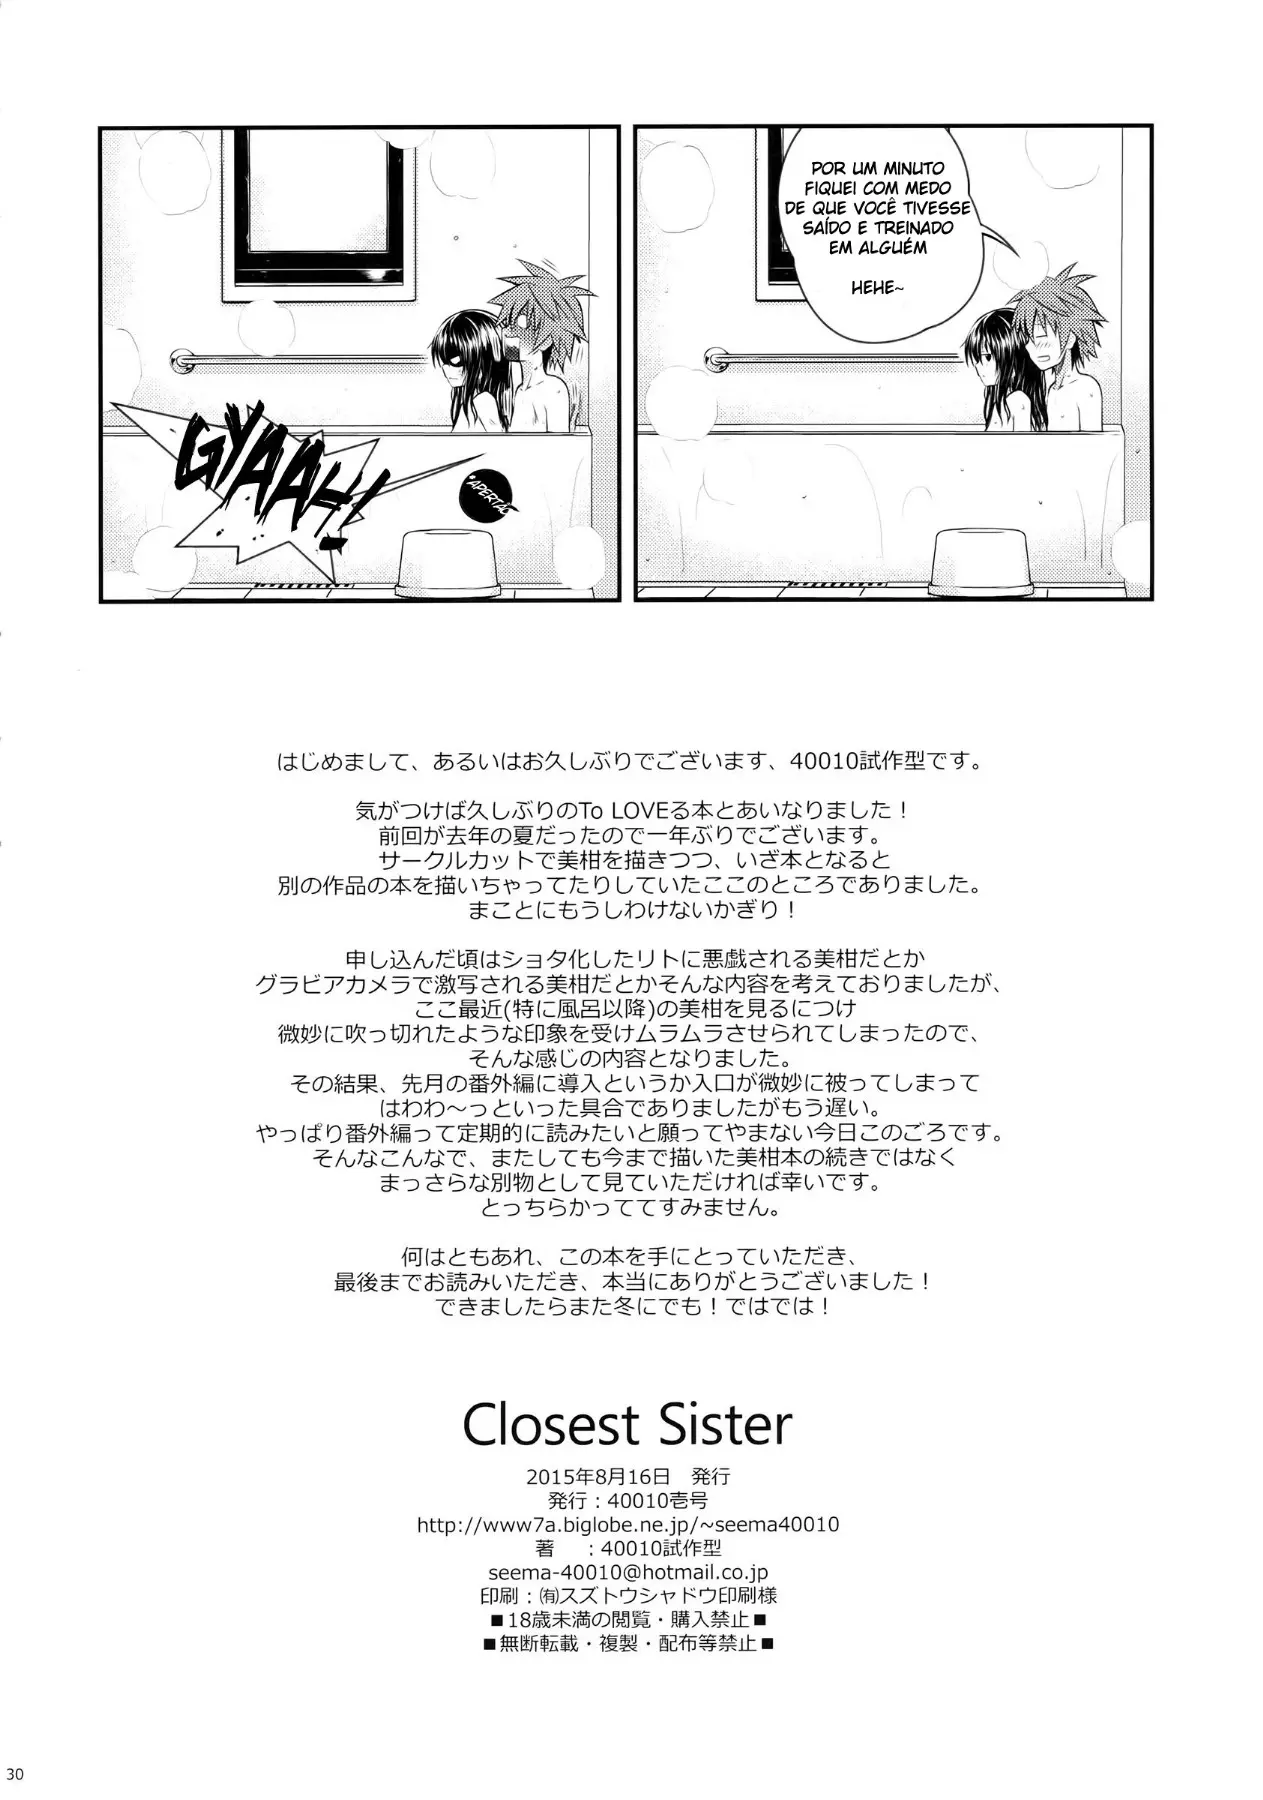 Closest Sister - Foto 29